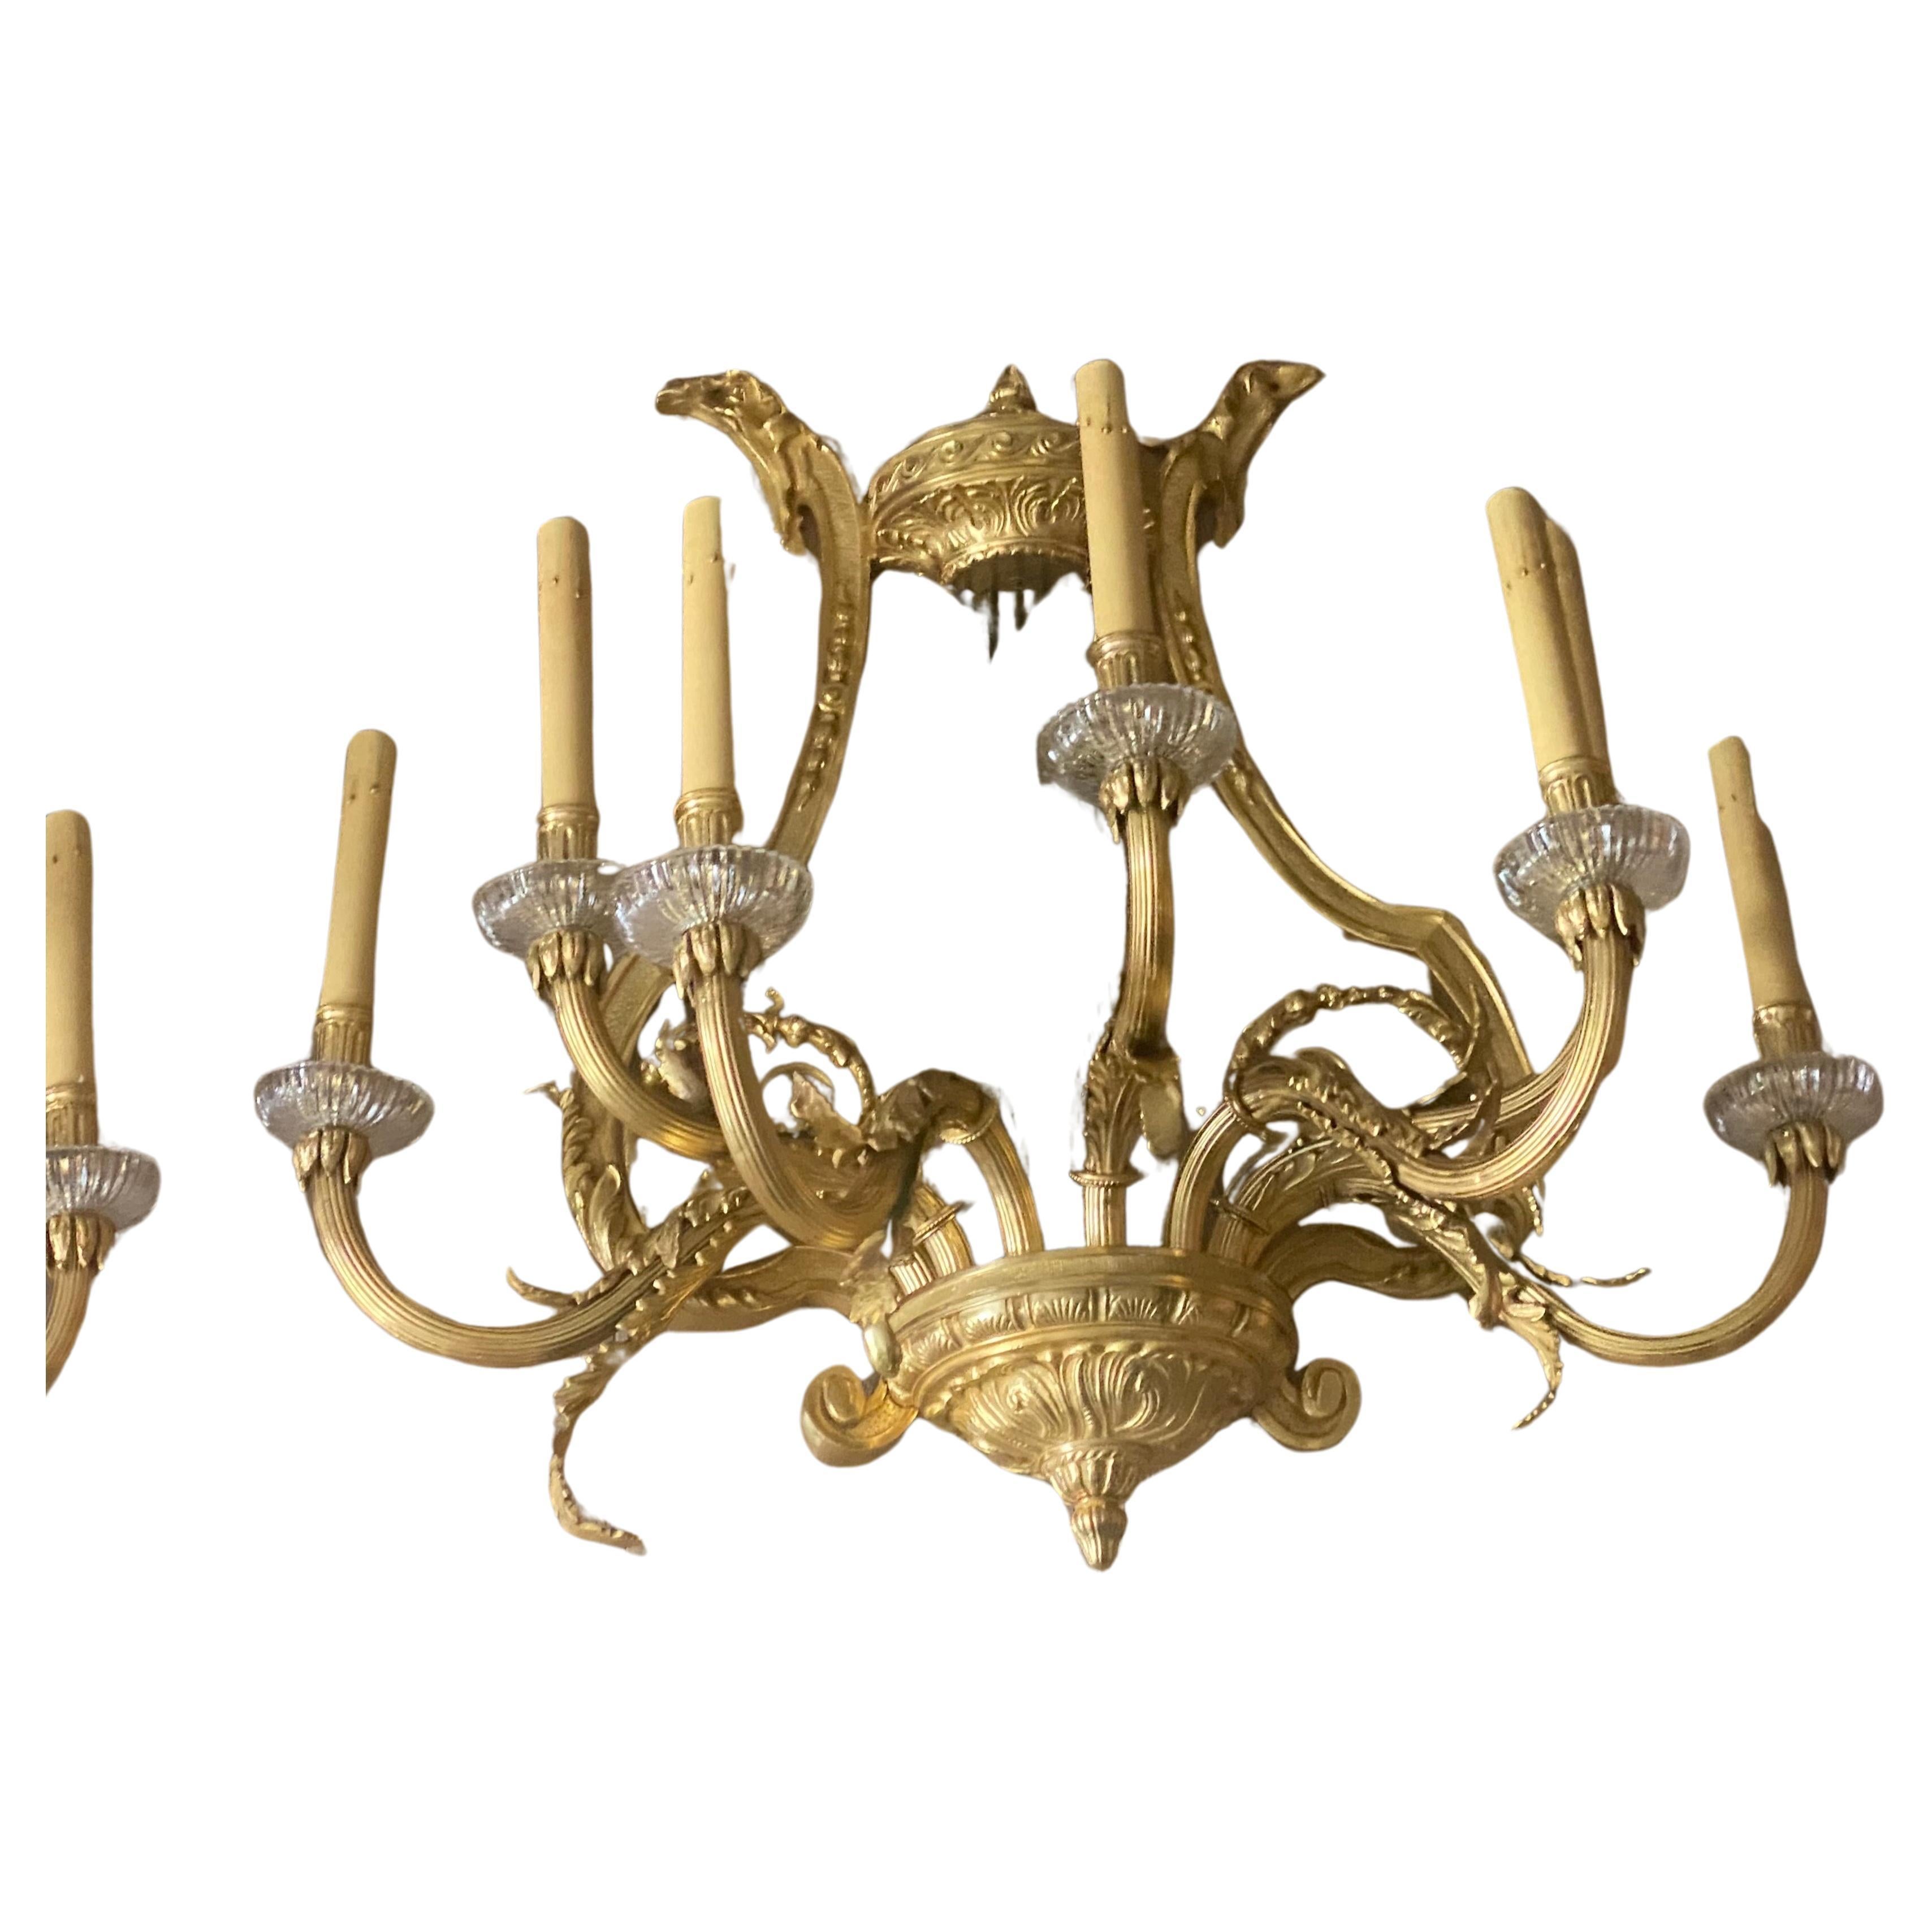 Huge Pair of 19th Century French Gilt Bronze Dore Wall Sconces For Sale 9